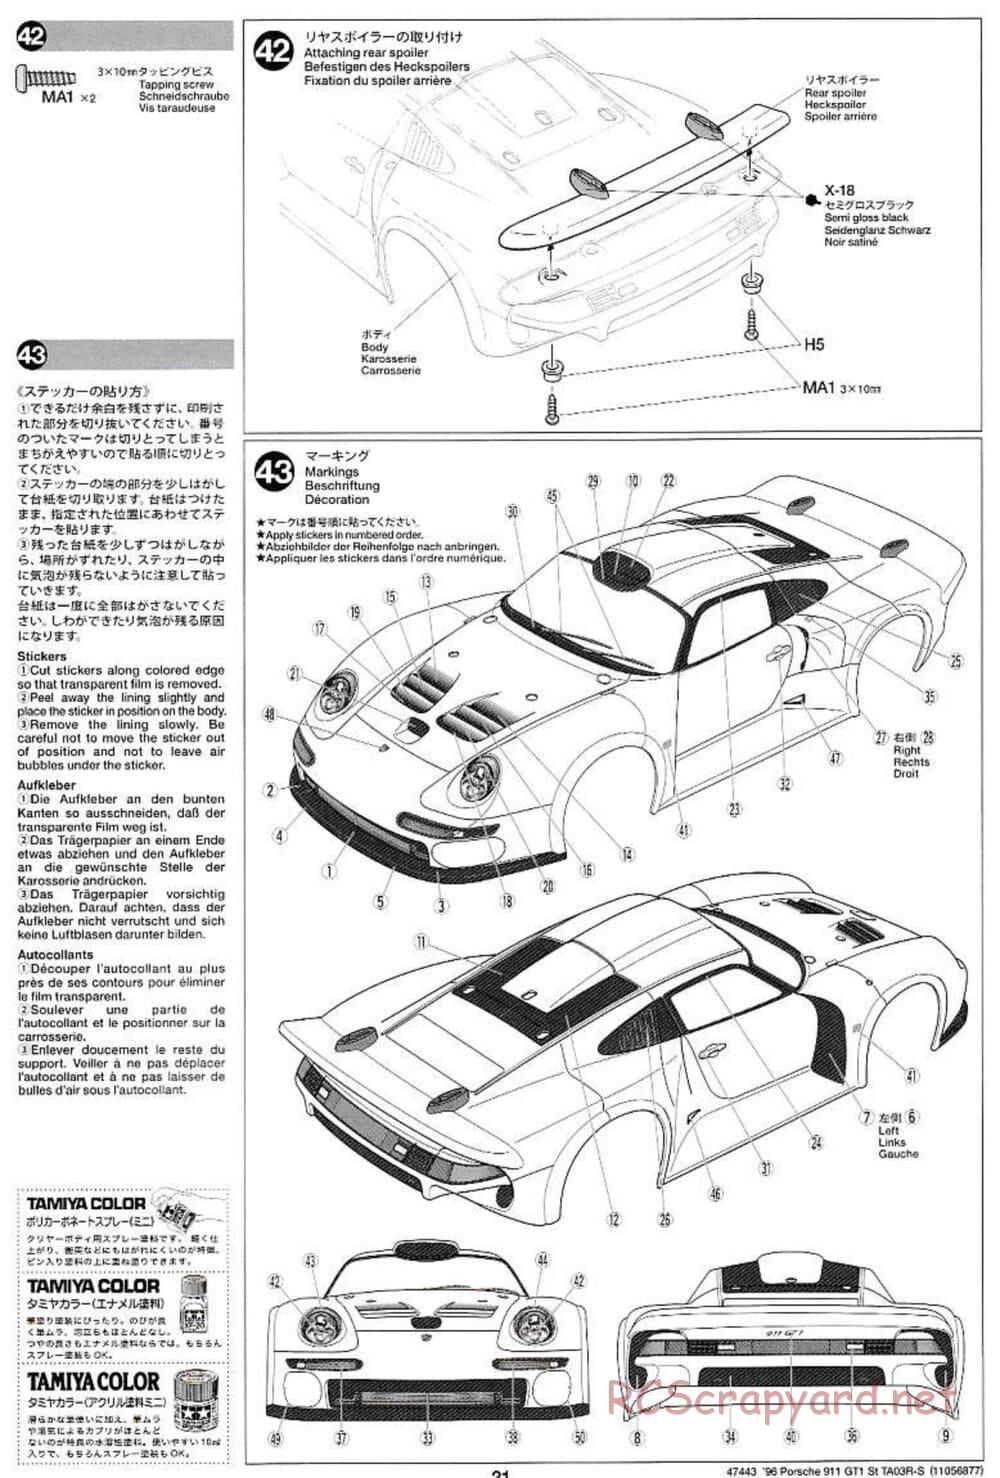 Tamiya - Porsche 911 GT1 Street - TA-03RS Chassis - Manual - Page 21